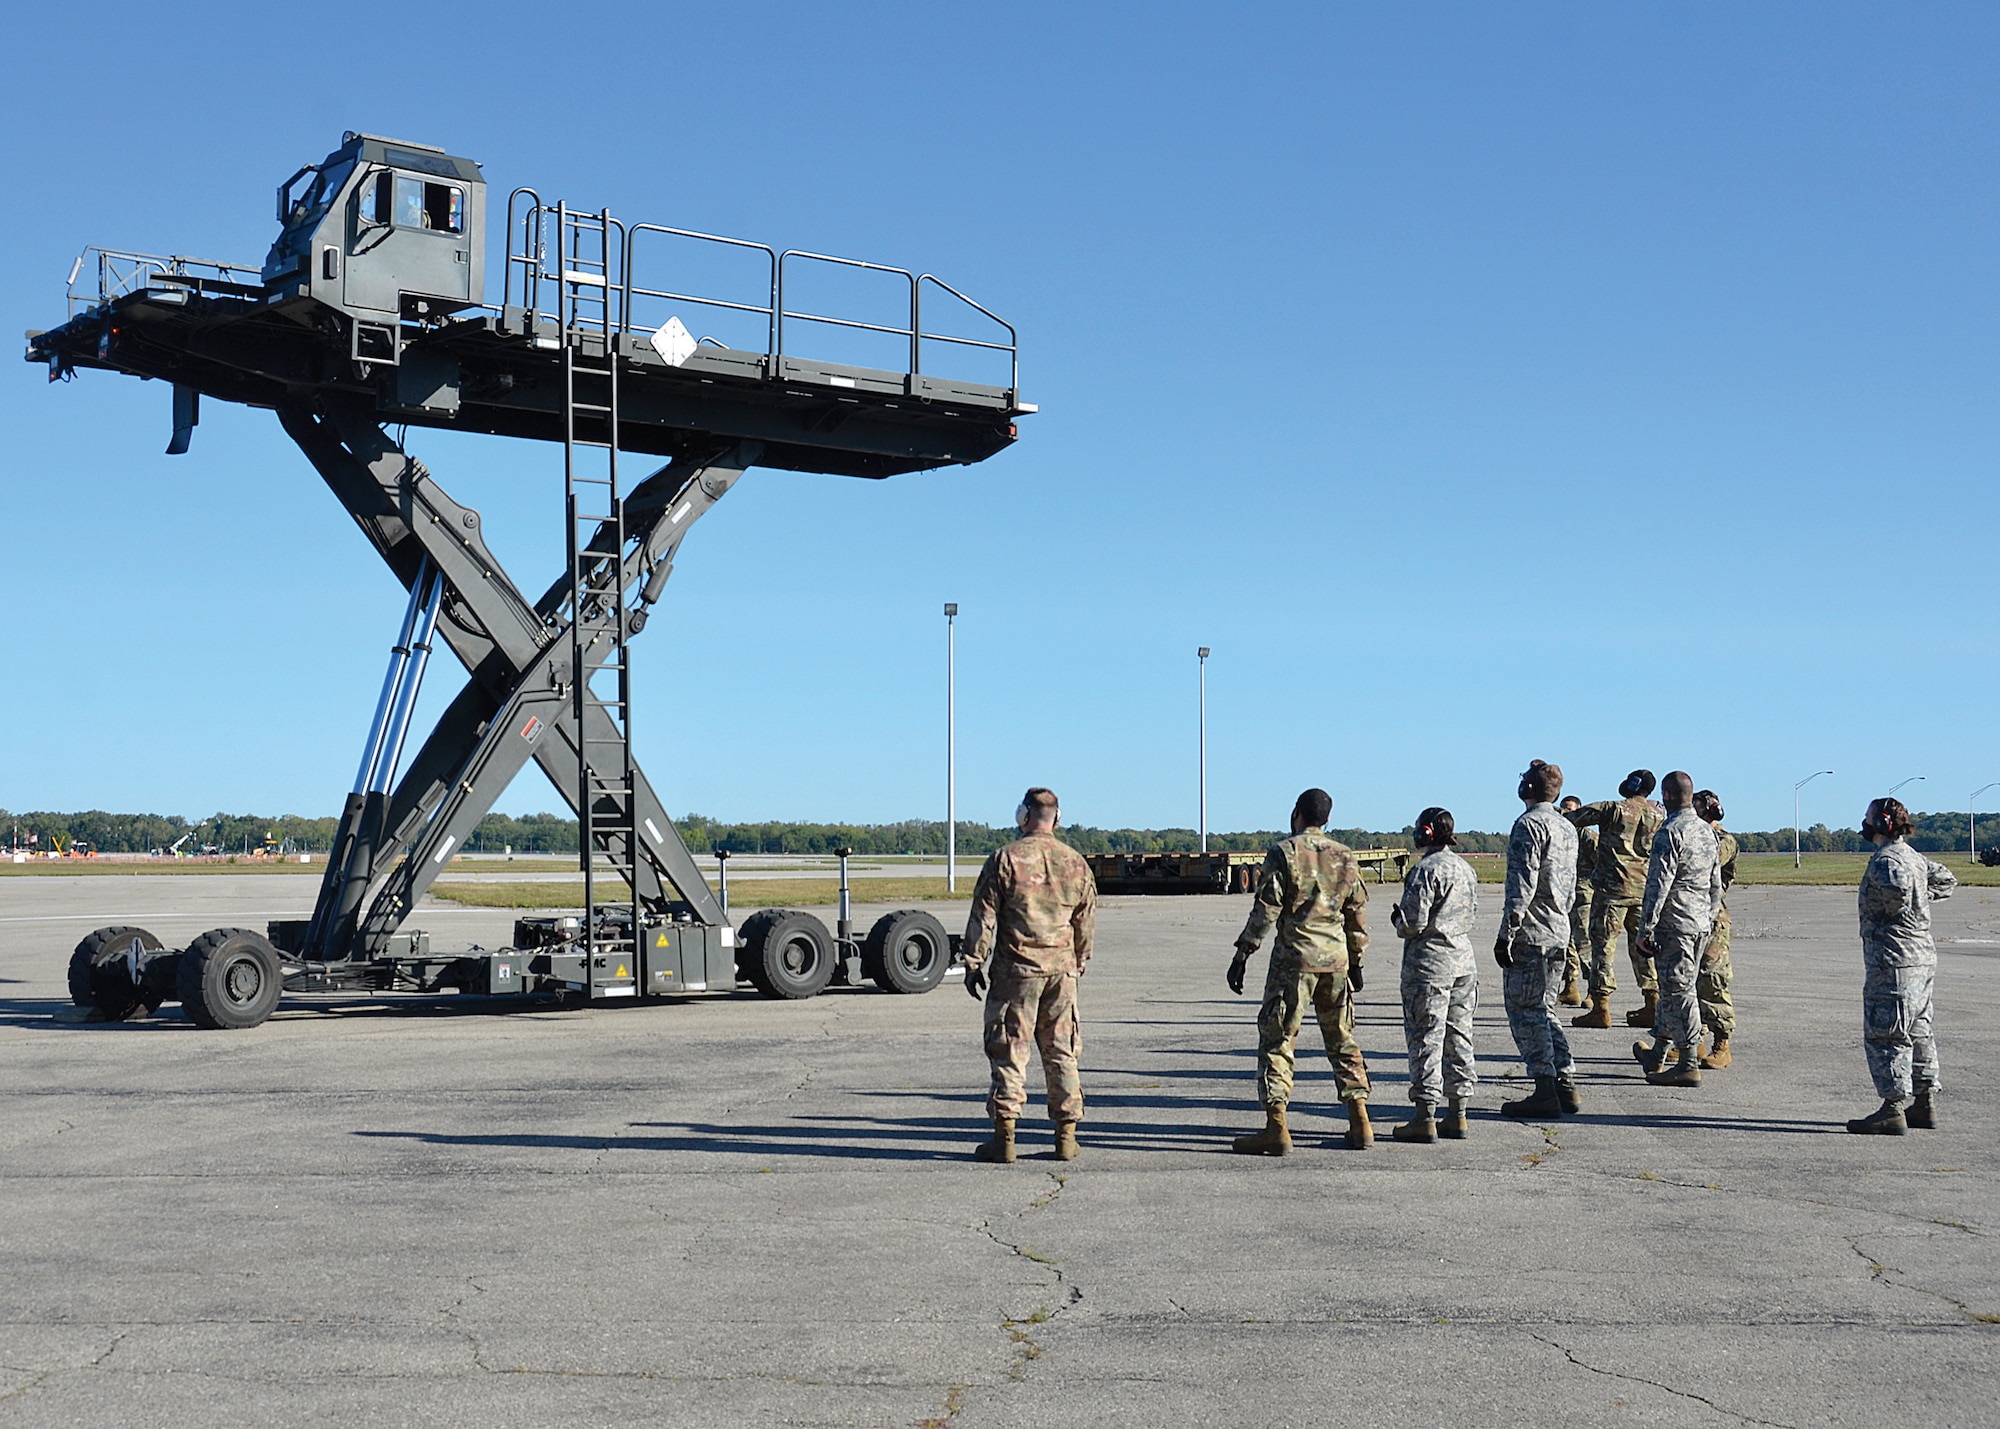 Airmen from the 87th Aerial Port Squadron practice the operation of a Halvorsen Loader Sept. 19, 2020, at Wright-Patterson Air Force Base, Ohio. The Halvorsen Loader, which entered into service in 2001, is a rapidly deployable, high reach mechanized aircraft loader that can transport and lift up to 25,000 of cargo 18 feet into the air to be loaded onto civilian and military aircraft.